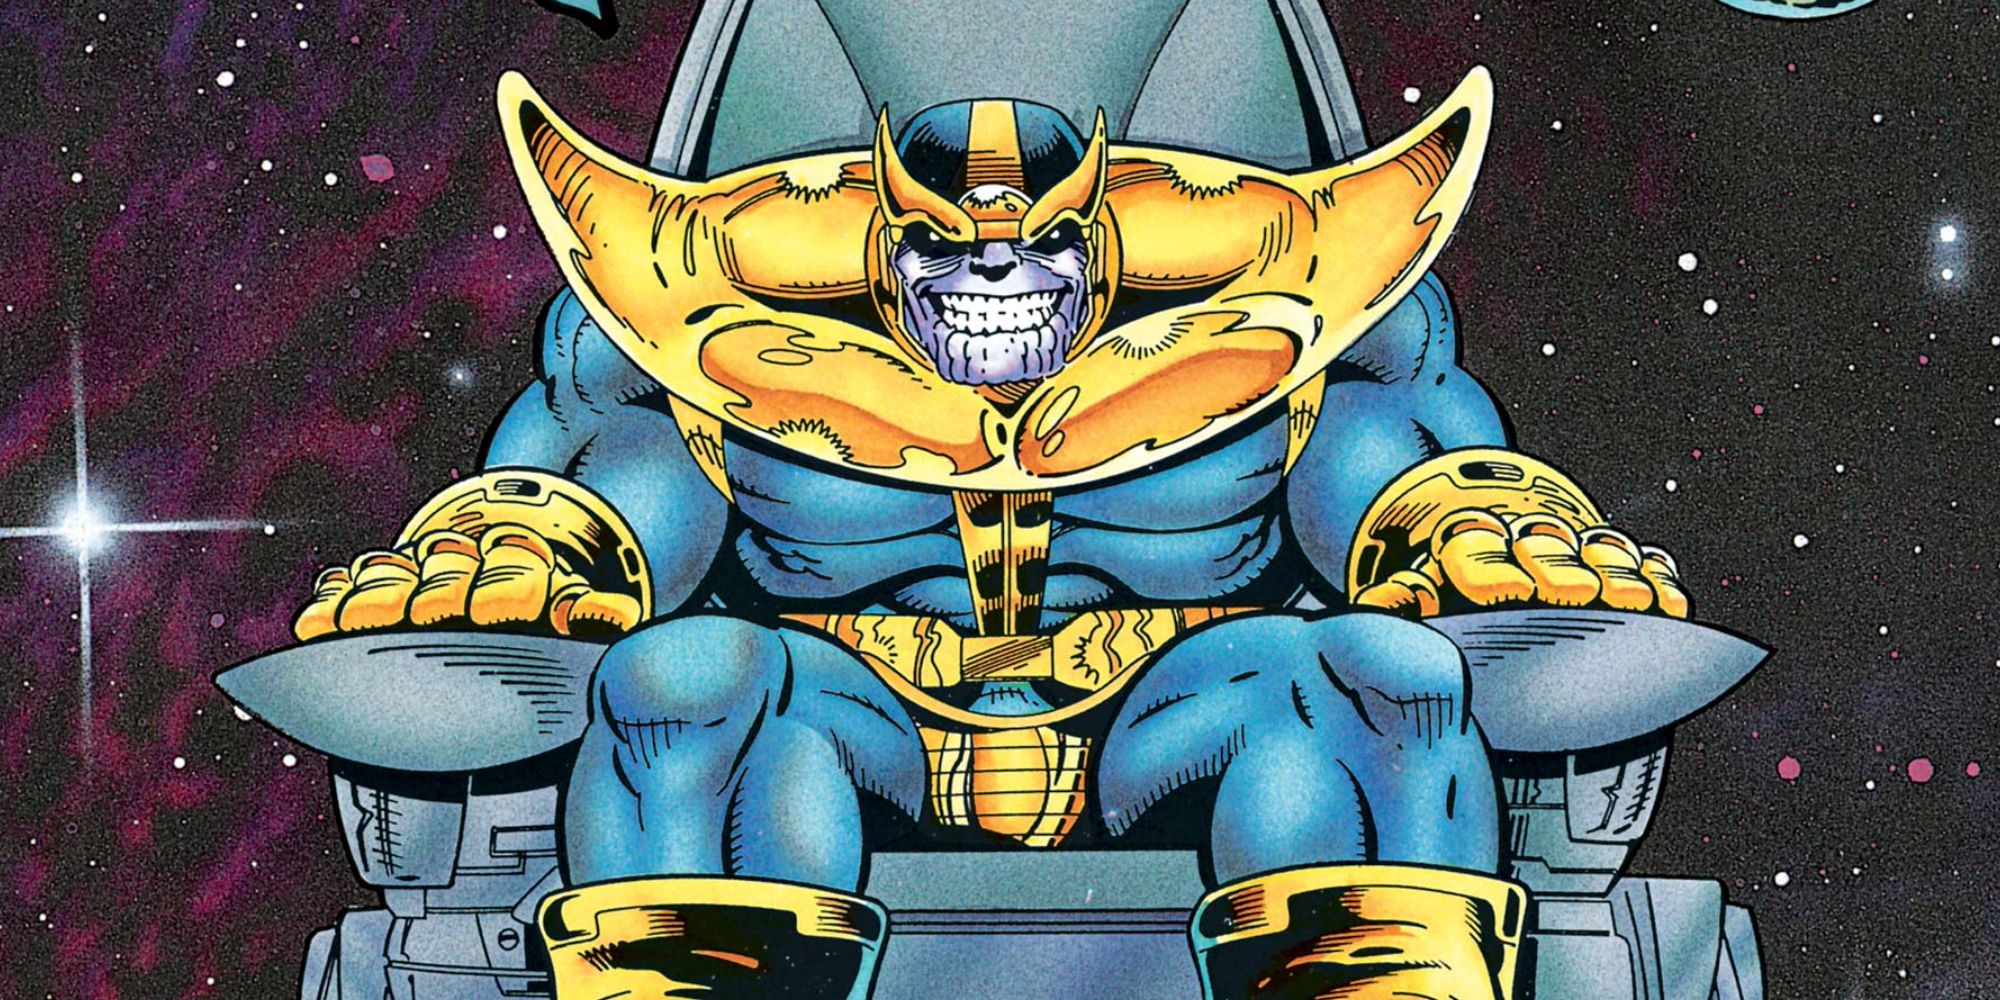 Thanos smiling and sitting on a throne in outer space